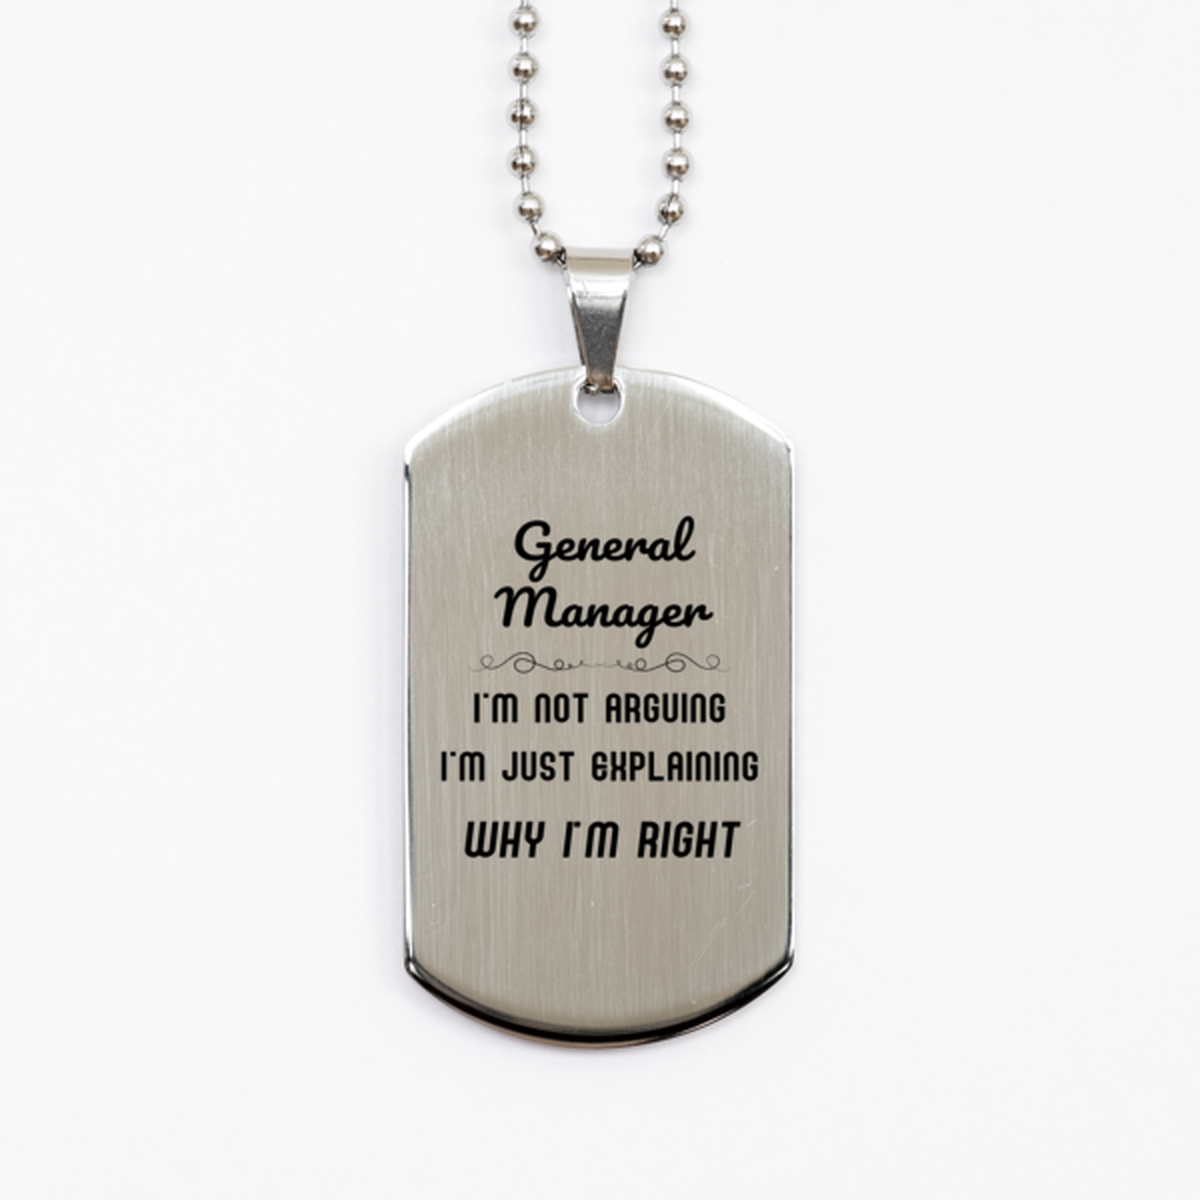 General Manager I'm not Arguing. I'm Just Explaining Why I'm RIGHT Silver Dog Tag, Funny Saying Quote General Manager Gifts For General Manager Graduation Birthday Christmas Gifts for Men Women Coworker